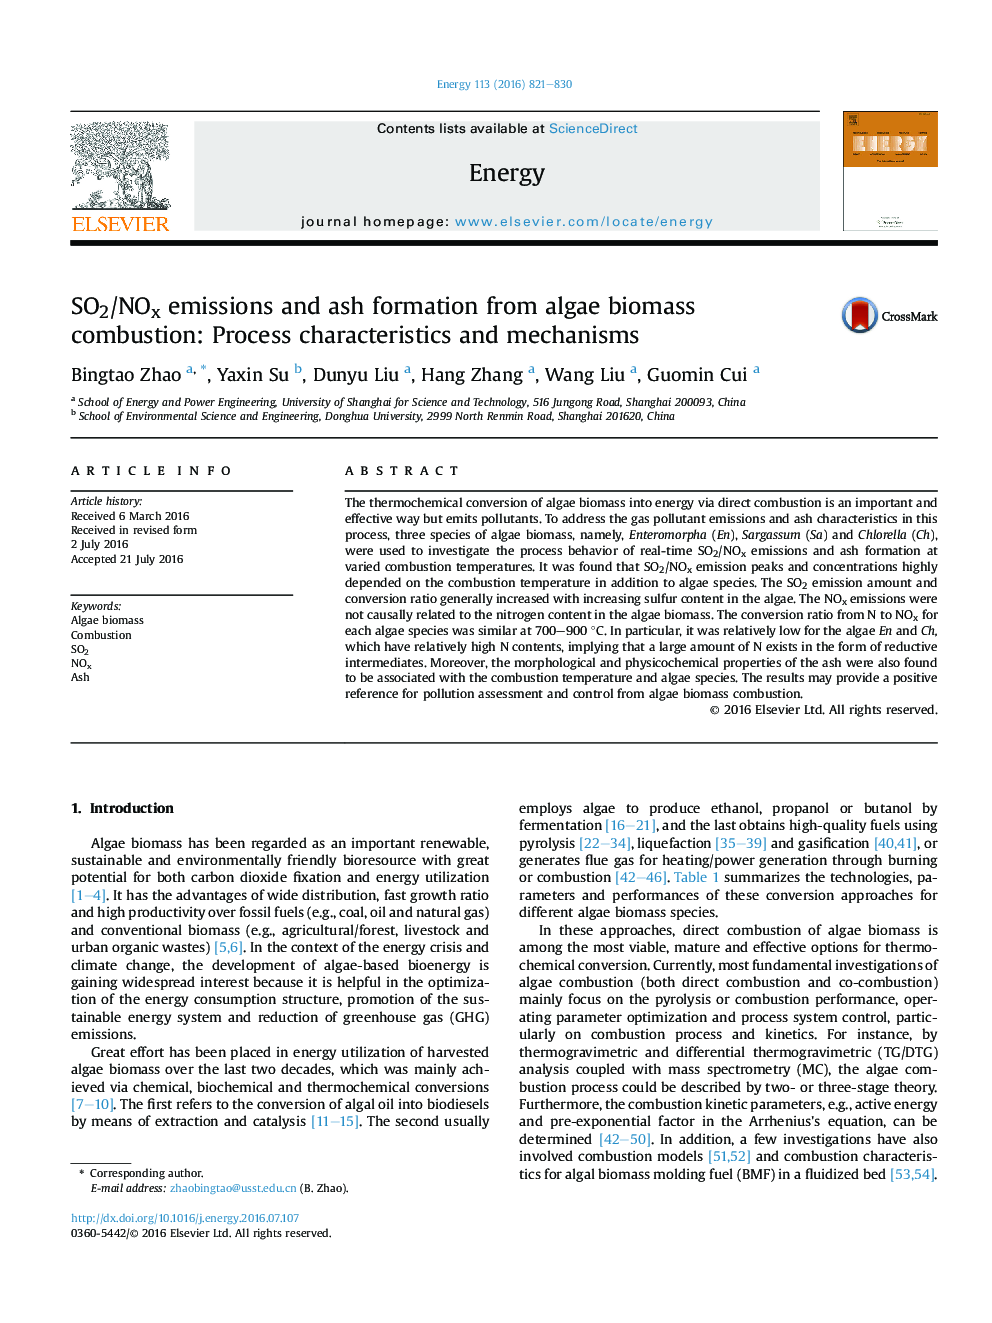 SO2/NOx emissions and ash formation from algae biomass combustion: Process characteristics and mechanisms